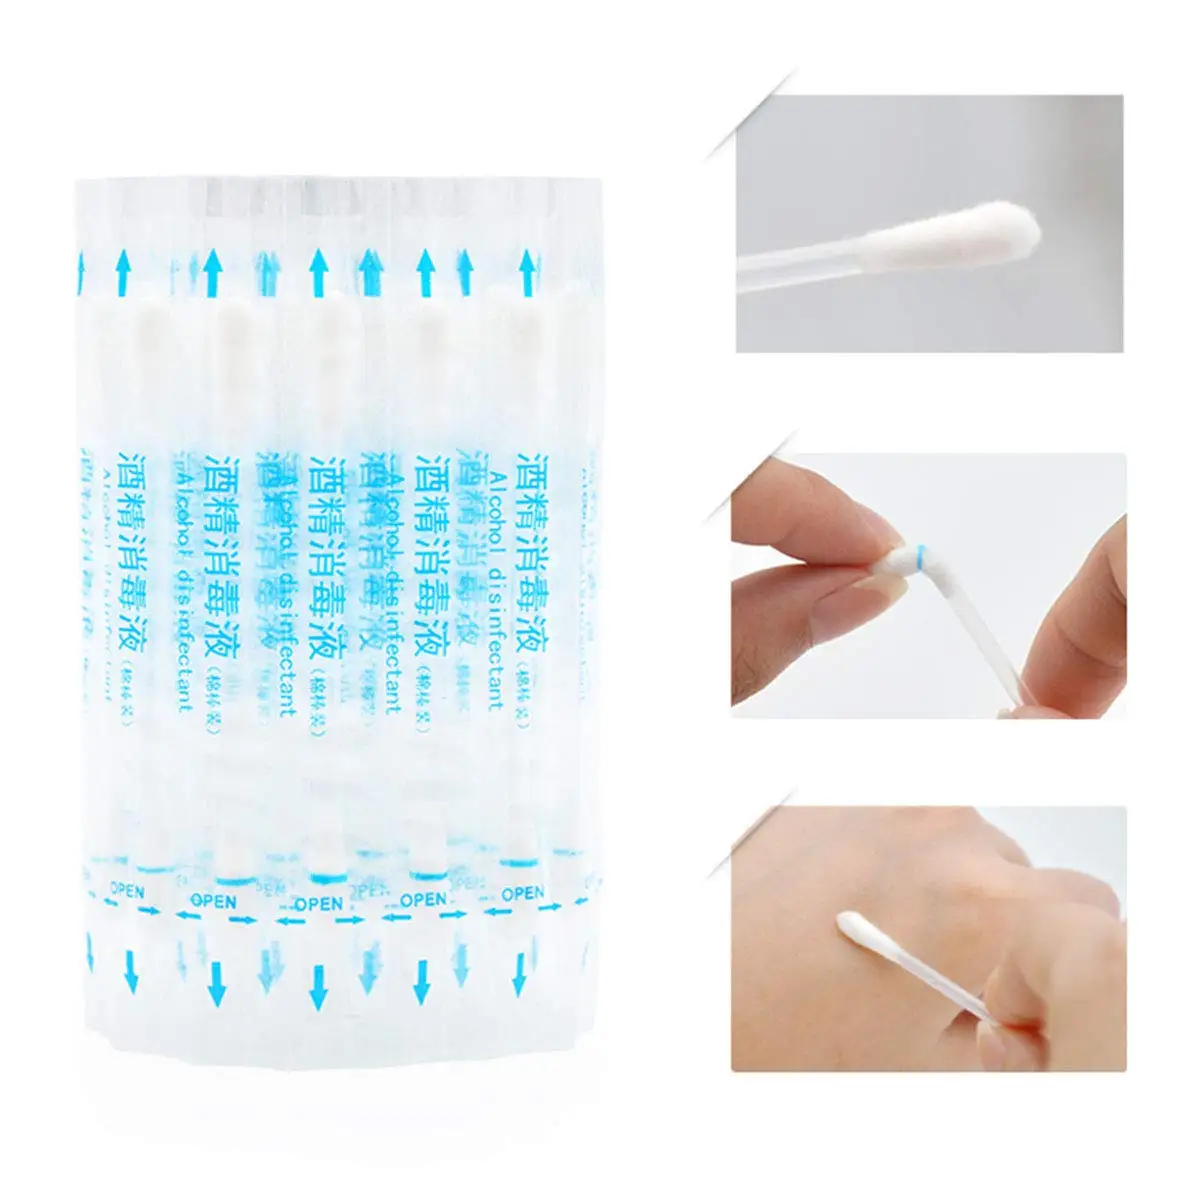 

outdoor 50/100Pcs - Rubbing Alcohol Q Tips Swabs Cotton Swabsticks Individually Wrapped for Wound Care Newborn Baby Safety